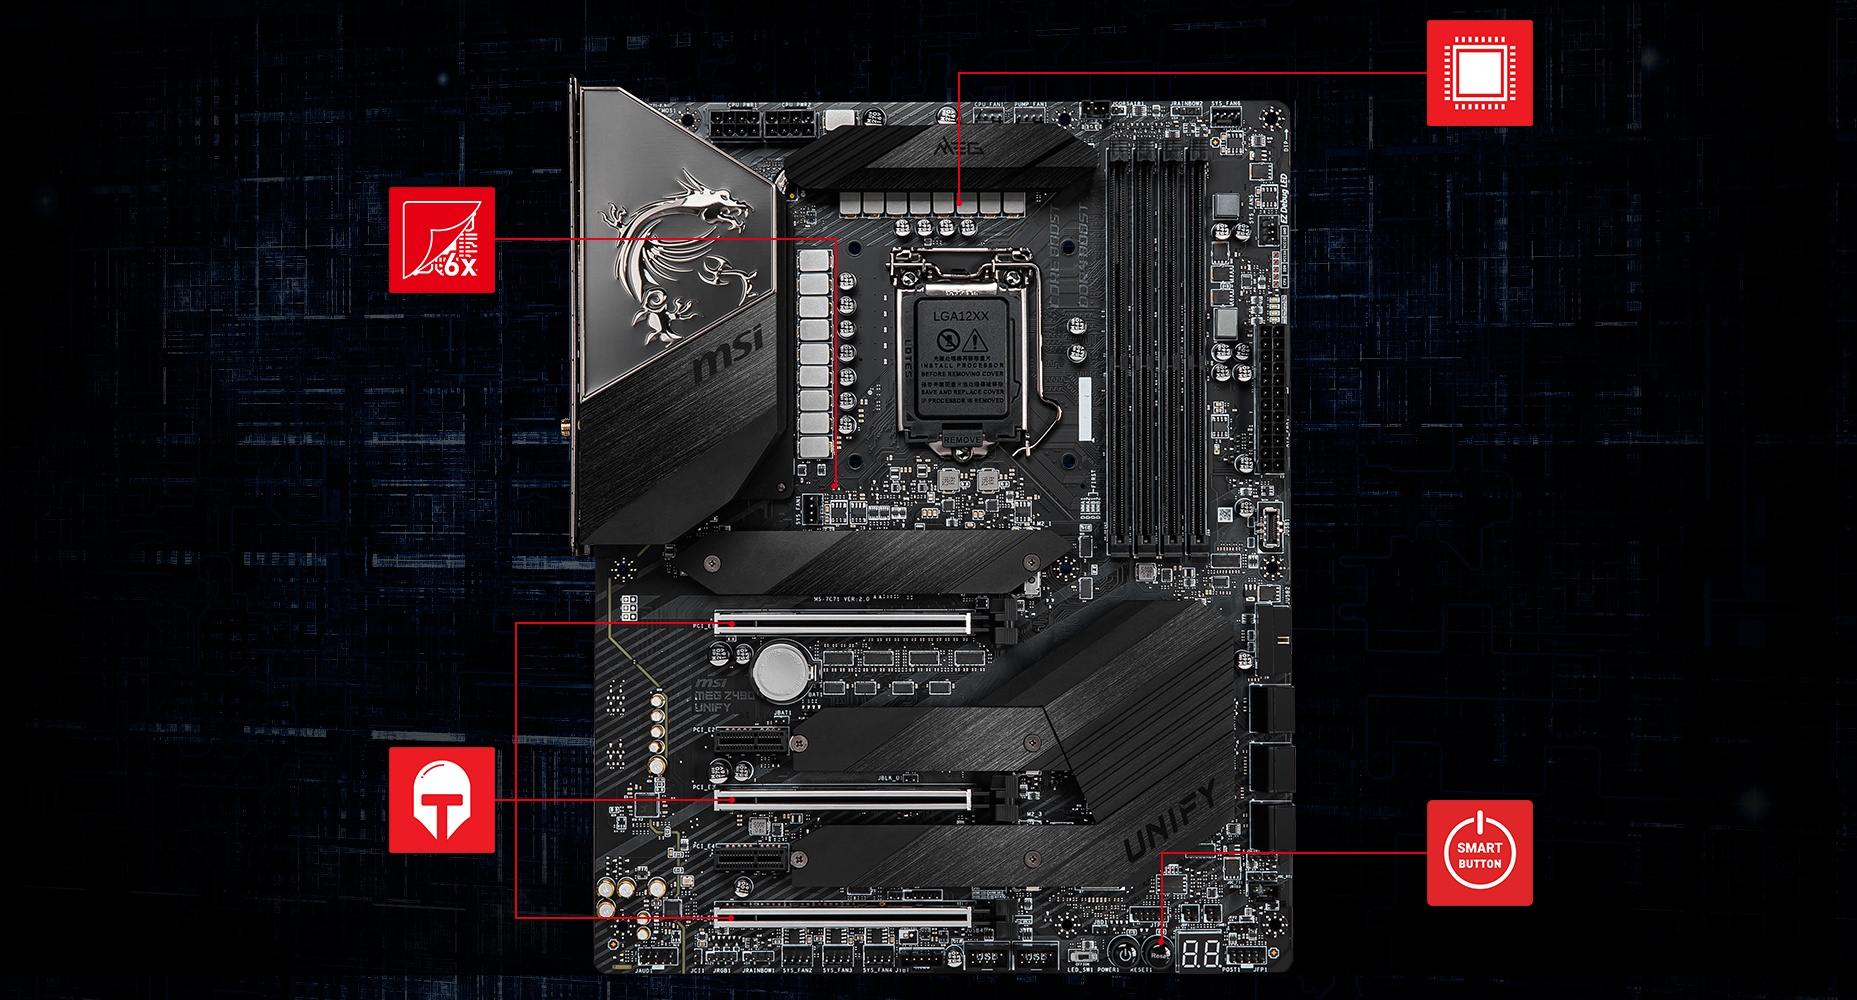 Creator z490 motherboard and a video card